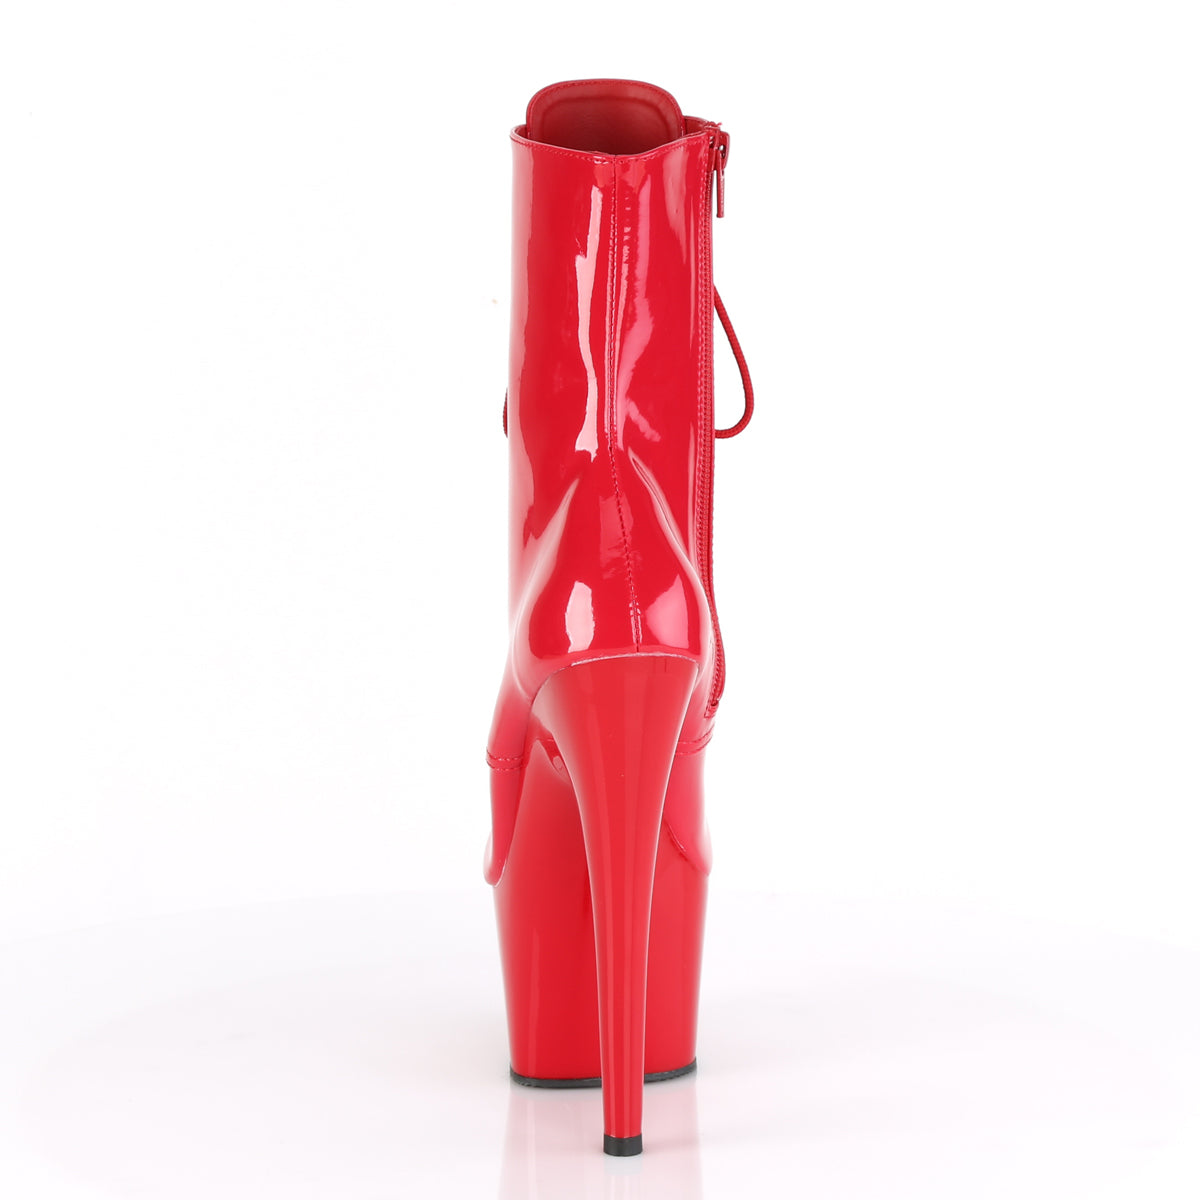 ADORE 1020 Pleaser 7 Inch Heel Red Exotic Dancing Ankle Boot Pleaser Sexy Shoes Fetish Footwear